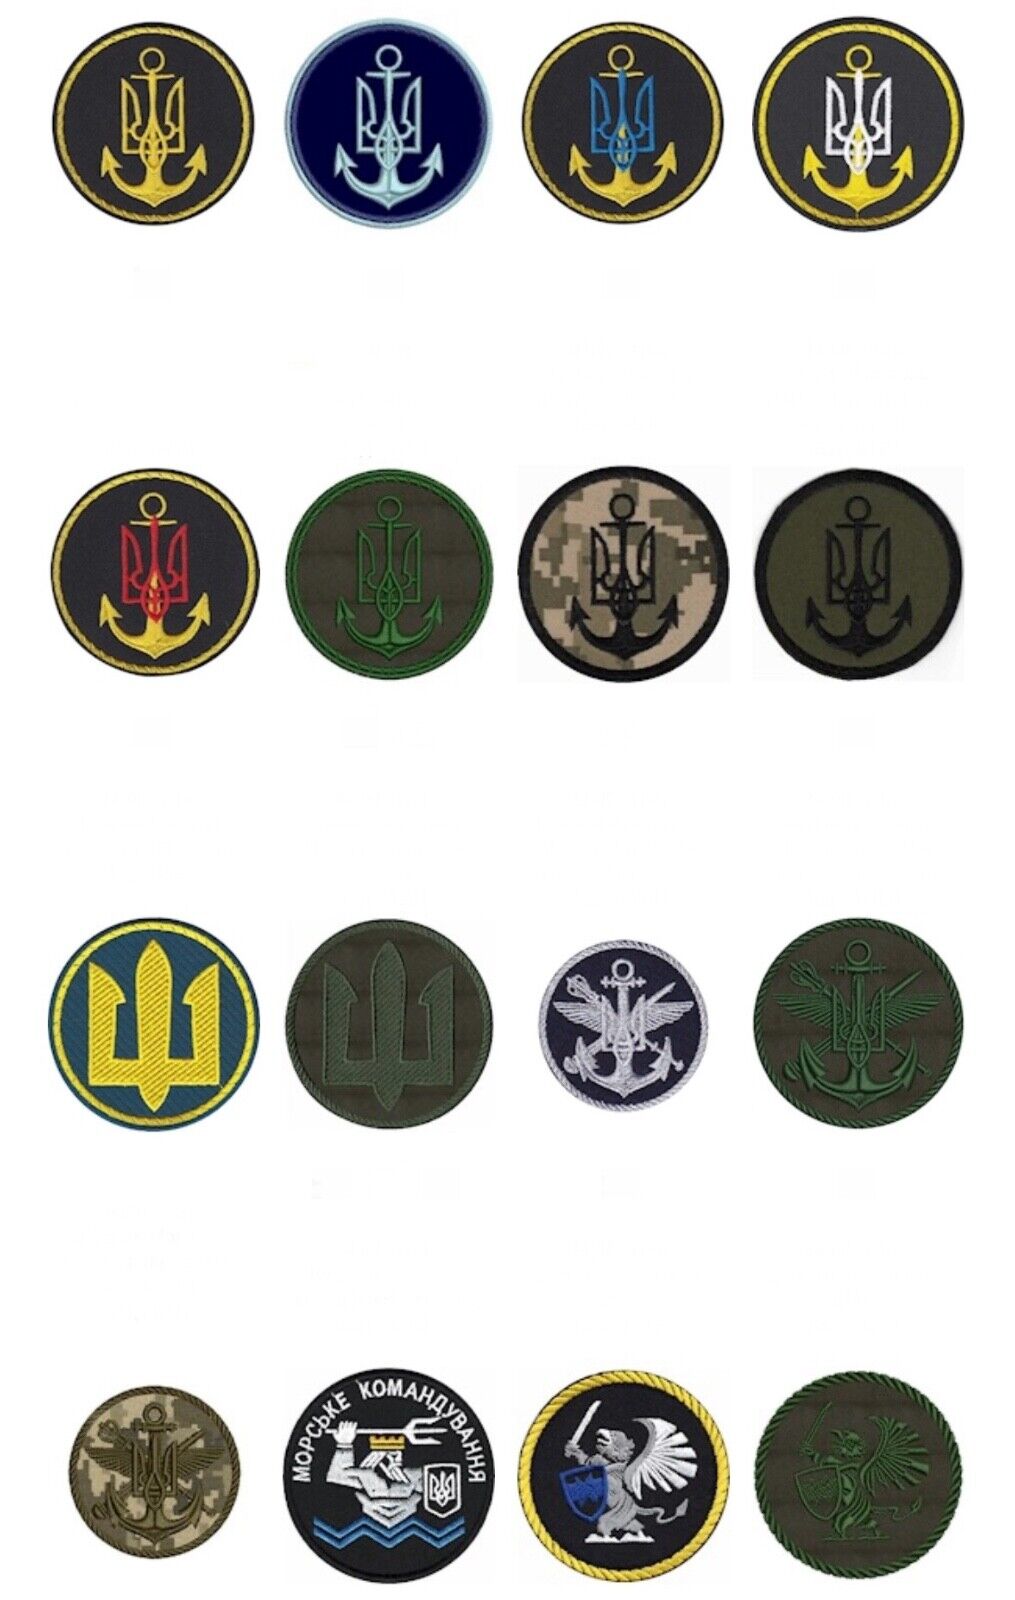 Ukraine patch set of 32 military war army  patches Ukrainian naval forces